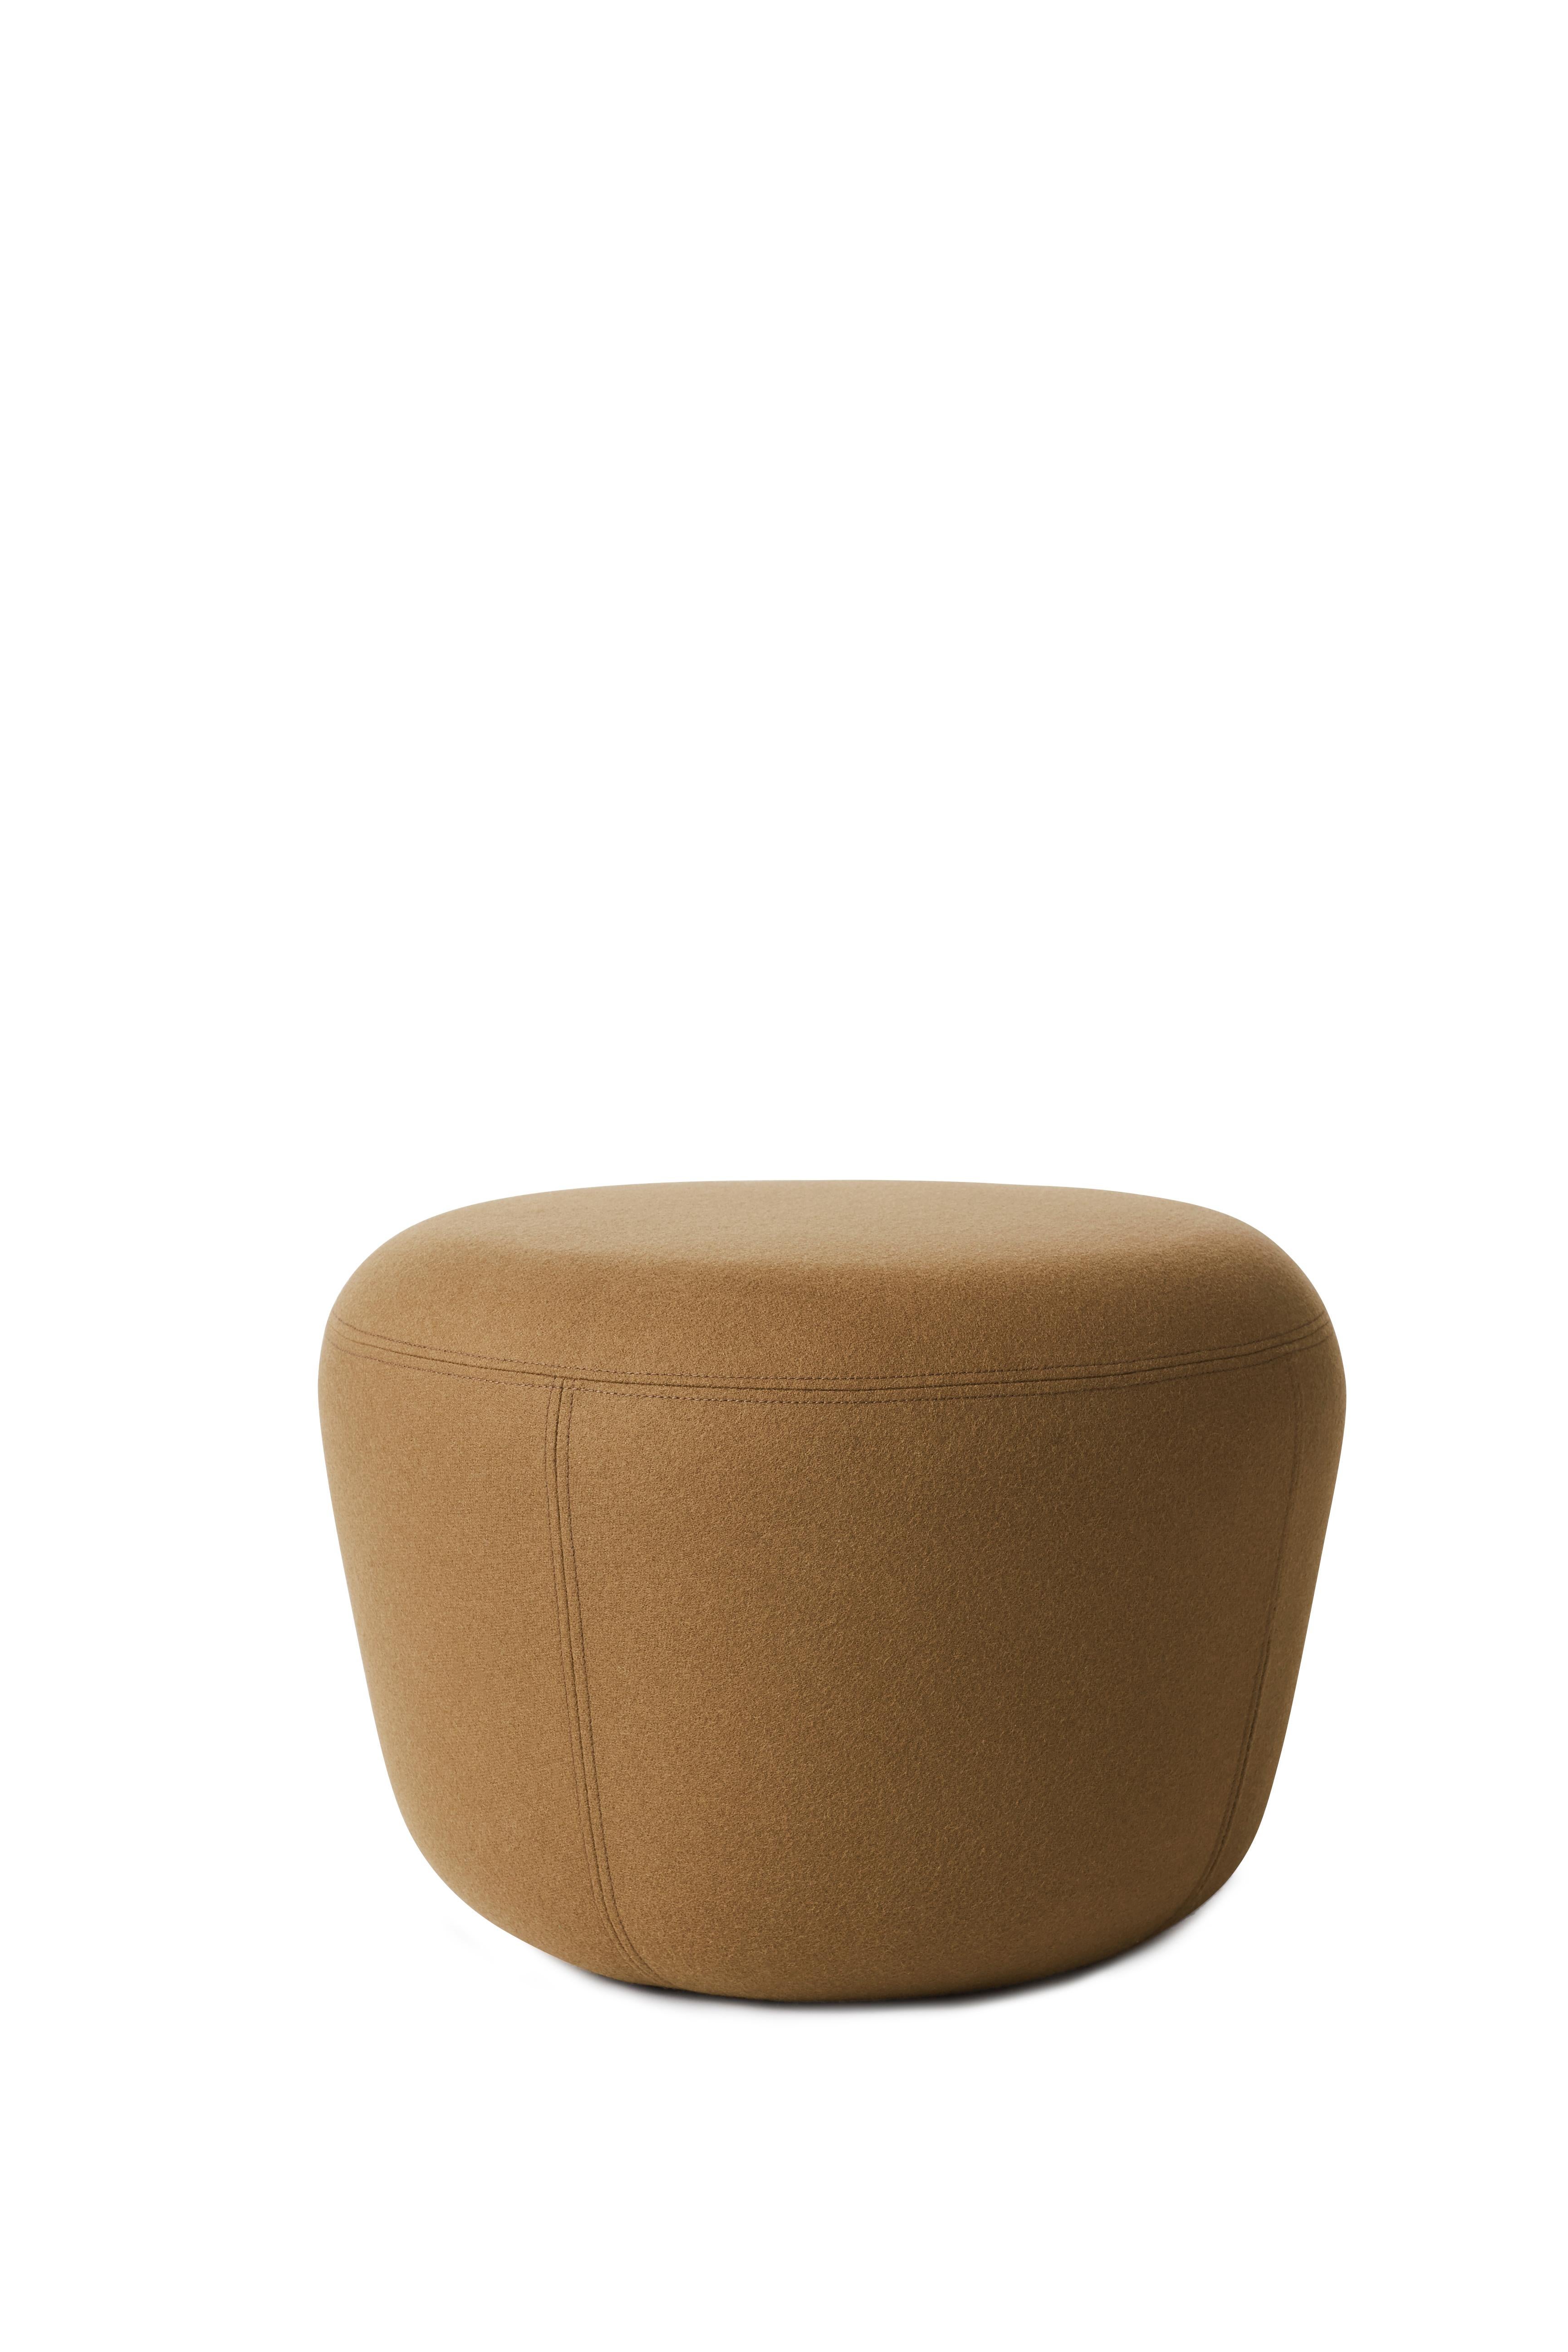 For Sale: Green (Hero 981) Haven Pouf, by Charlotte Høncke from Warm Nordic